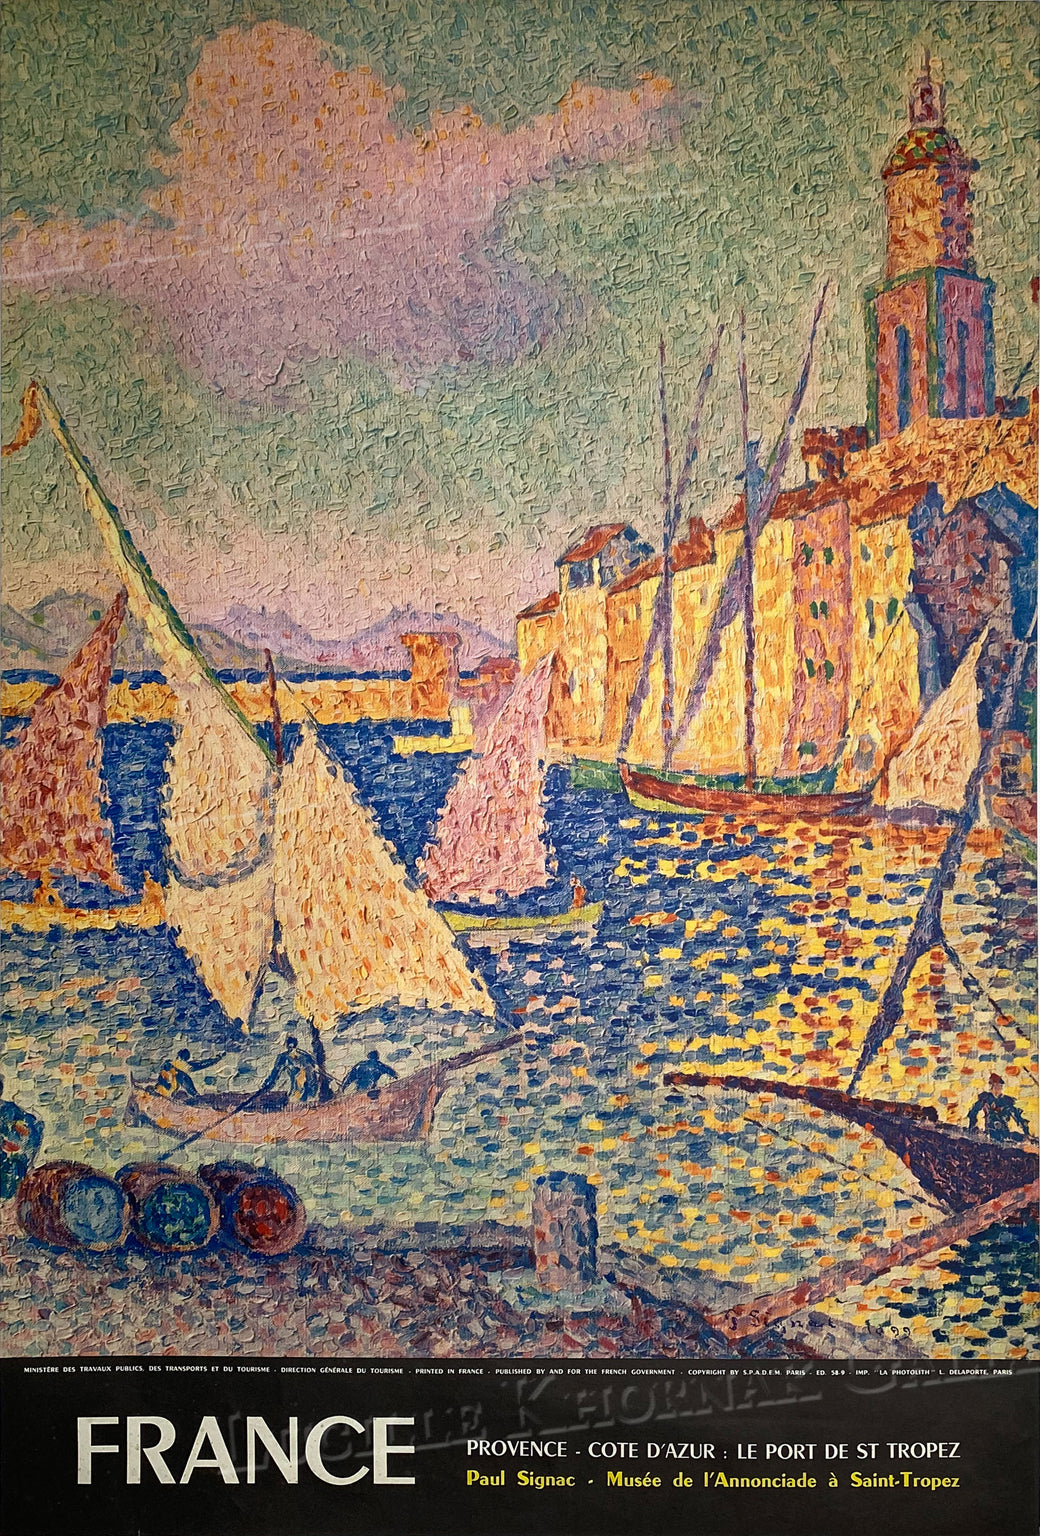 France, Paul Signac, Cote D'Azur, Provence travel poster 23.5in by 16in